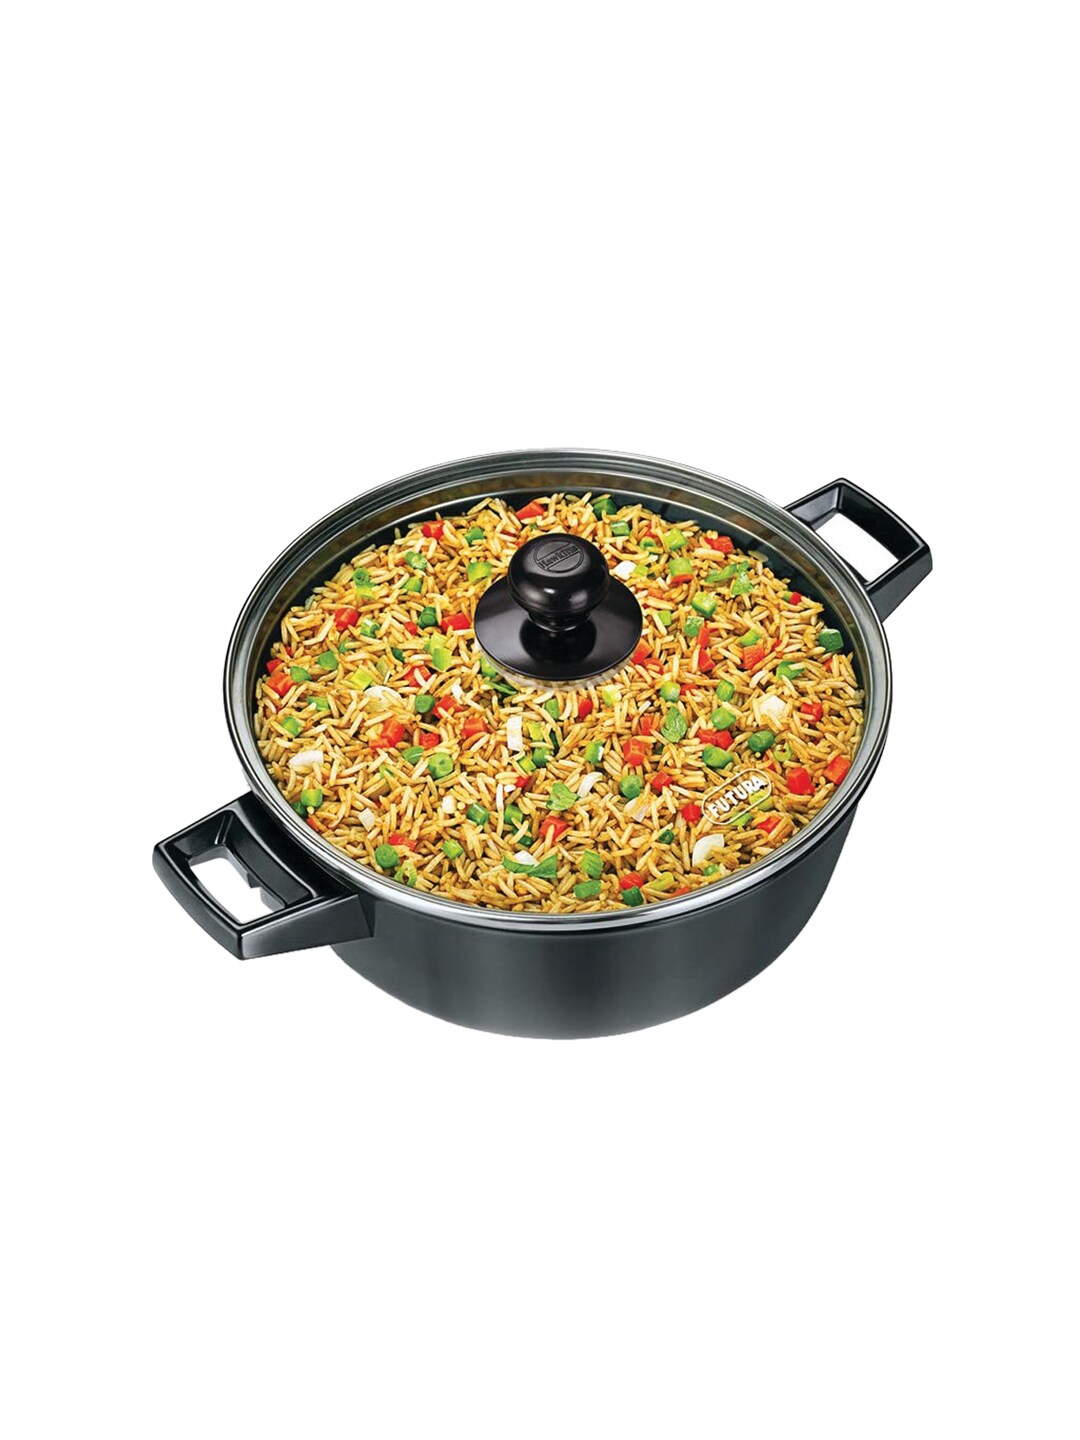 Hawkins Black Futura Nonstick Cook-n-Serve 3 Litres Bowl with Glass Lid Price in India